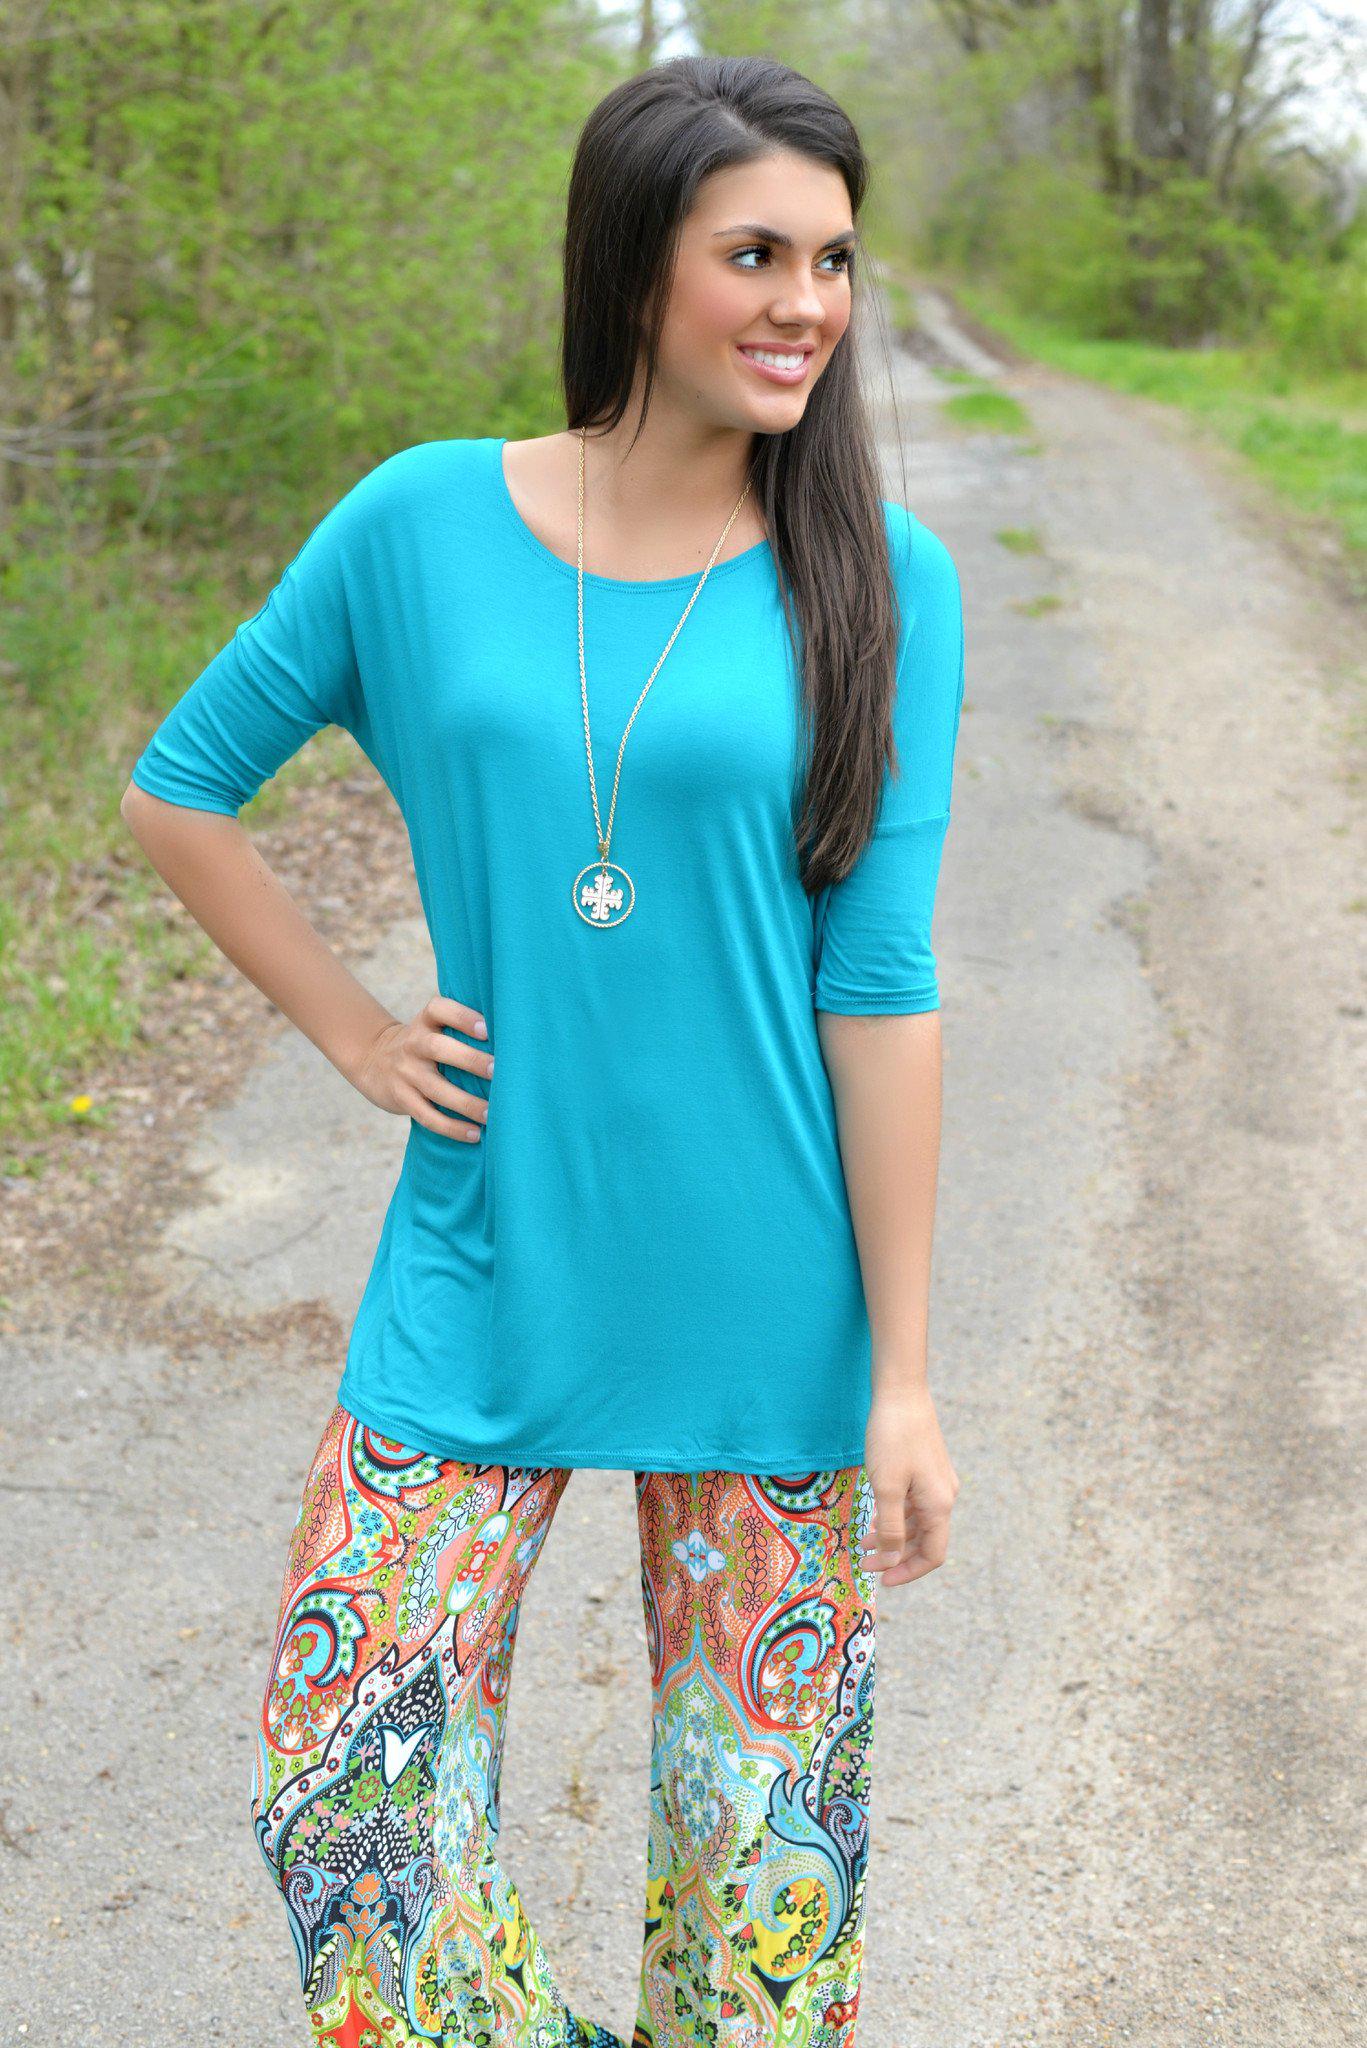 Ocean Blue Piko Style Bamboo Top – The Paisley Rooster Boutique